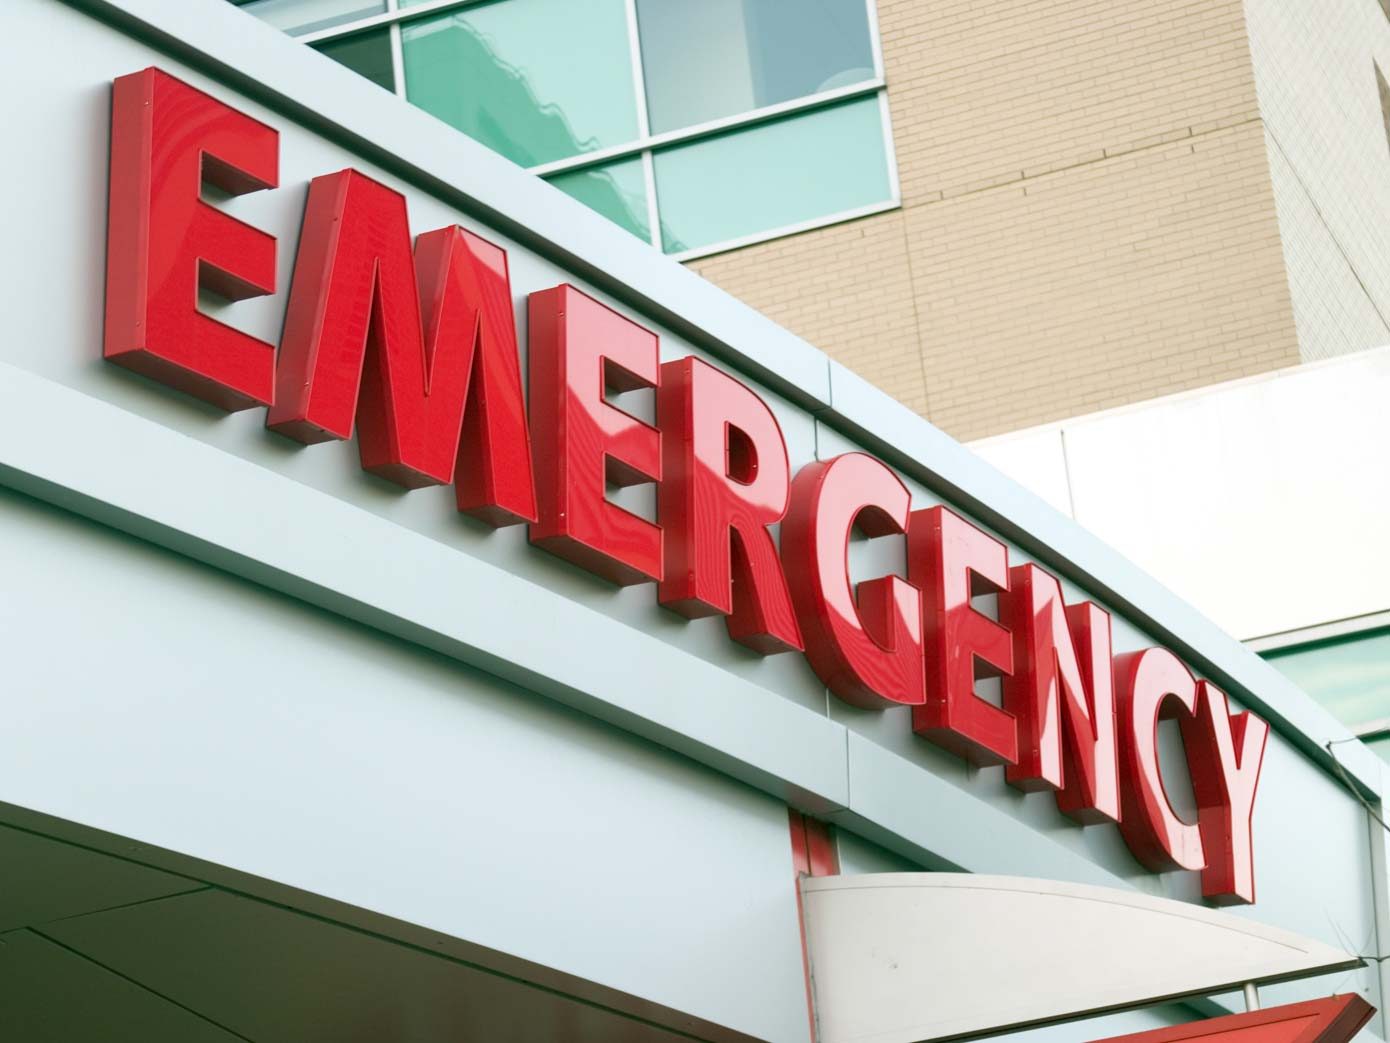 Improving hospital emergency department care using patient perspectives